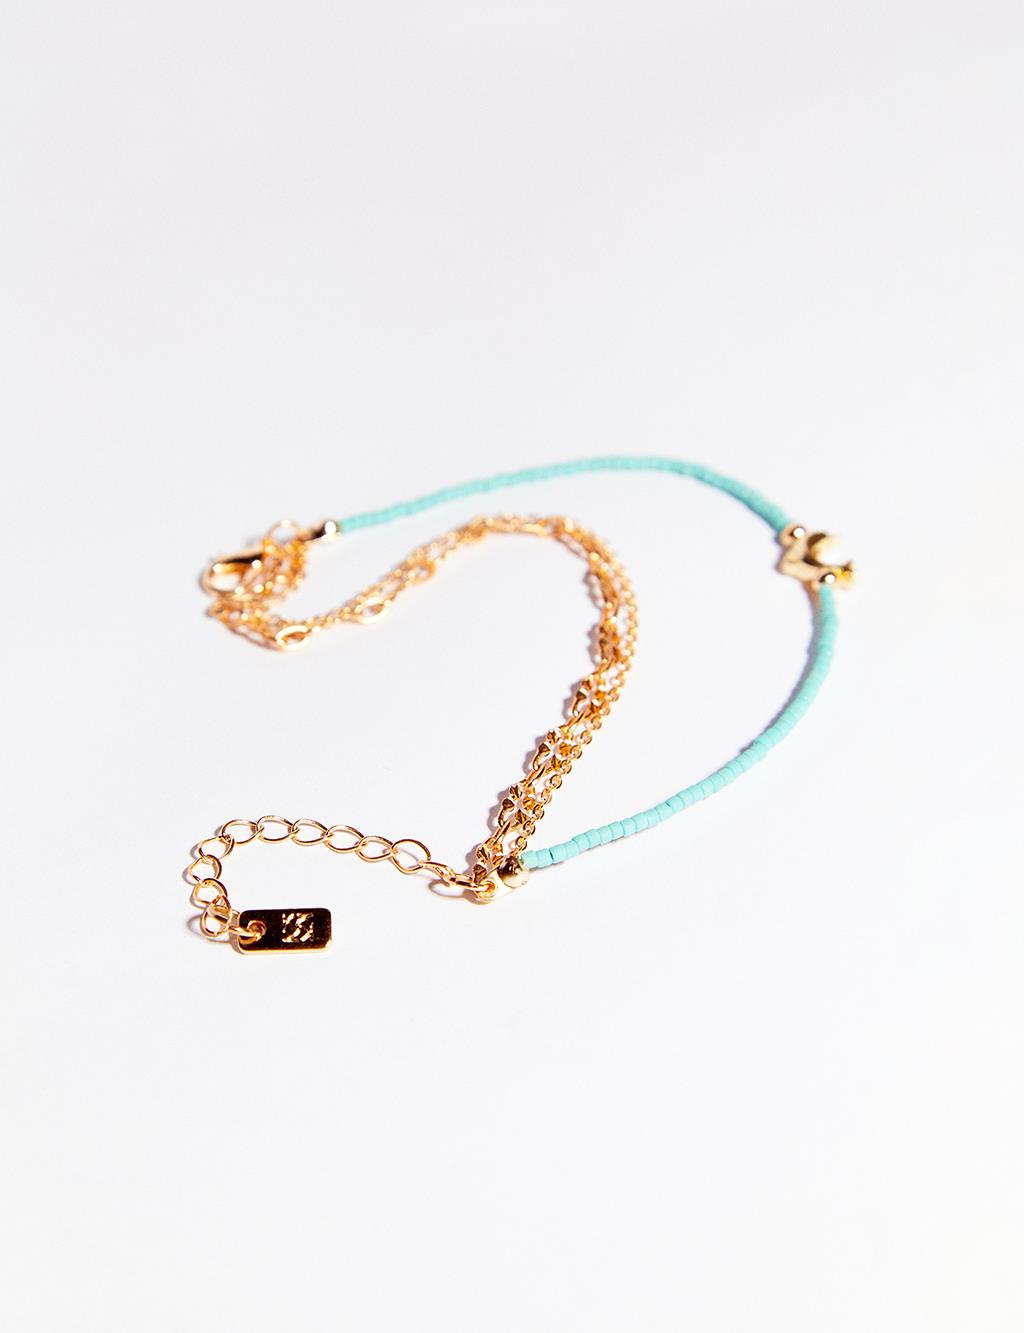 Dolphin-Styled Double-View Bracelet